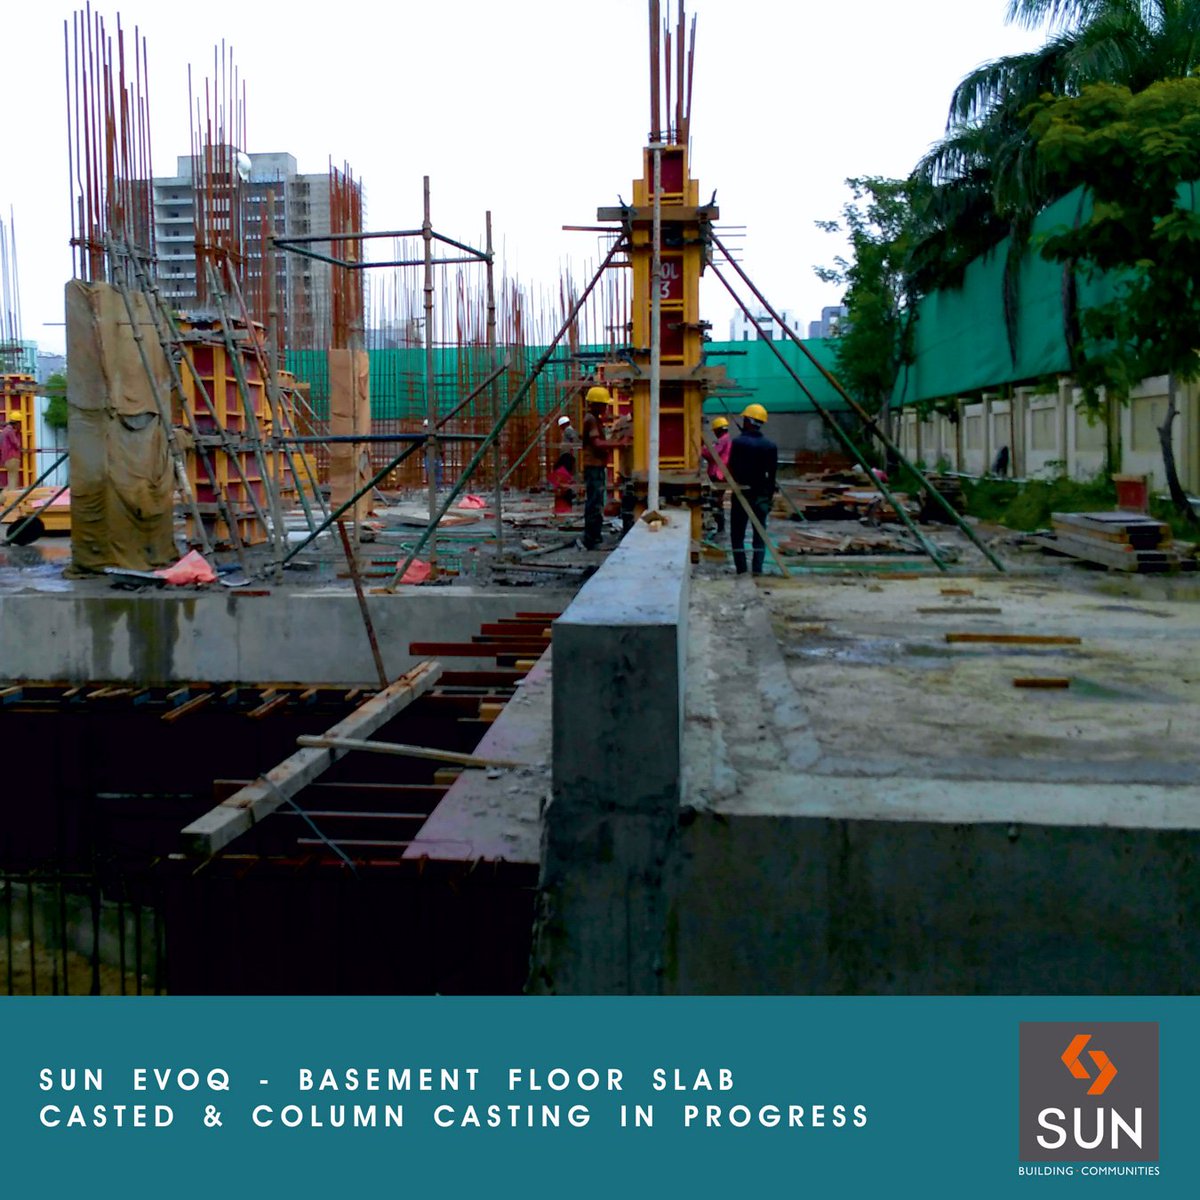 To know more about the progress of #SunEvoq, call 09824541801 or email us at evoq@sunbuilders.in https://t.co/aDOvGGahcn